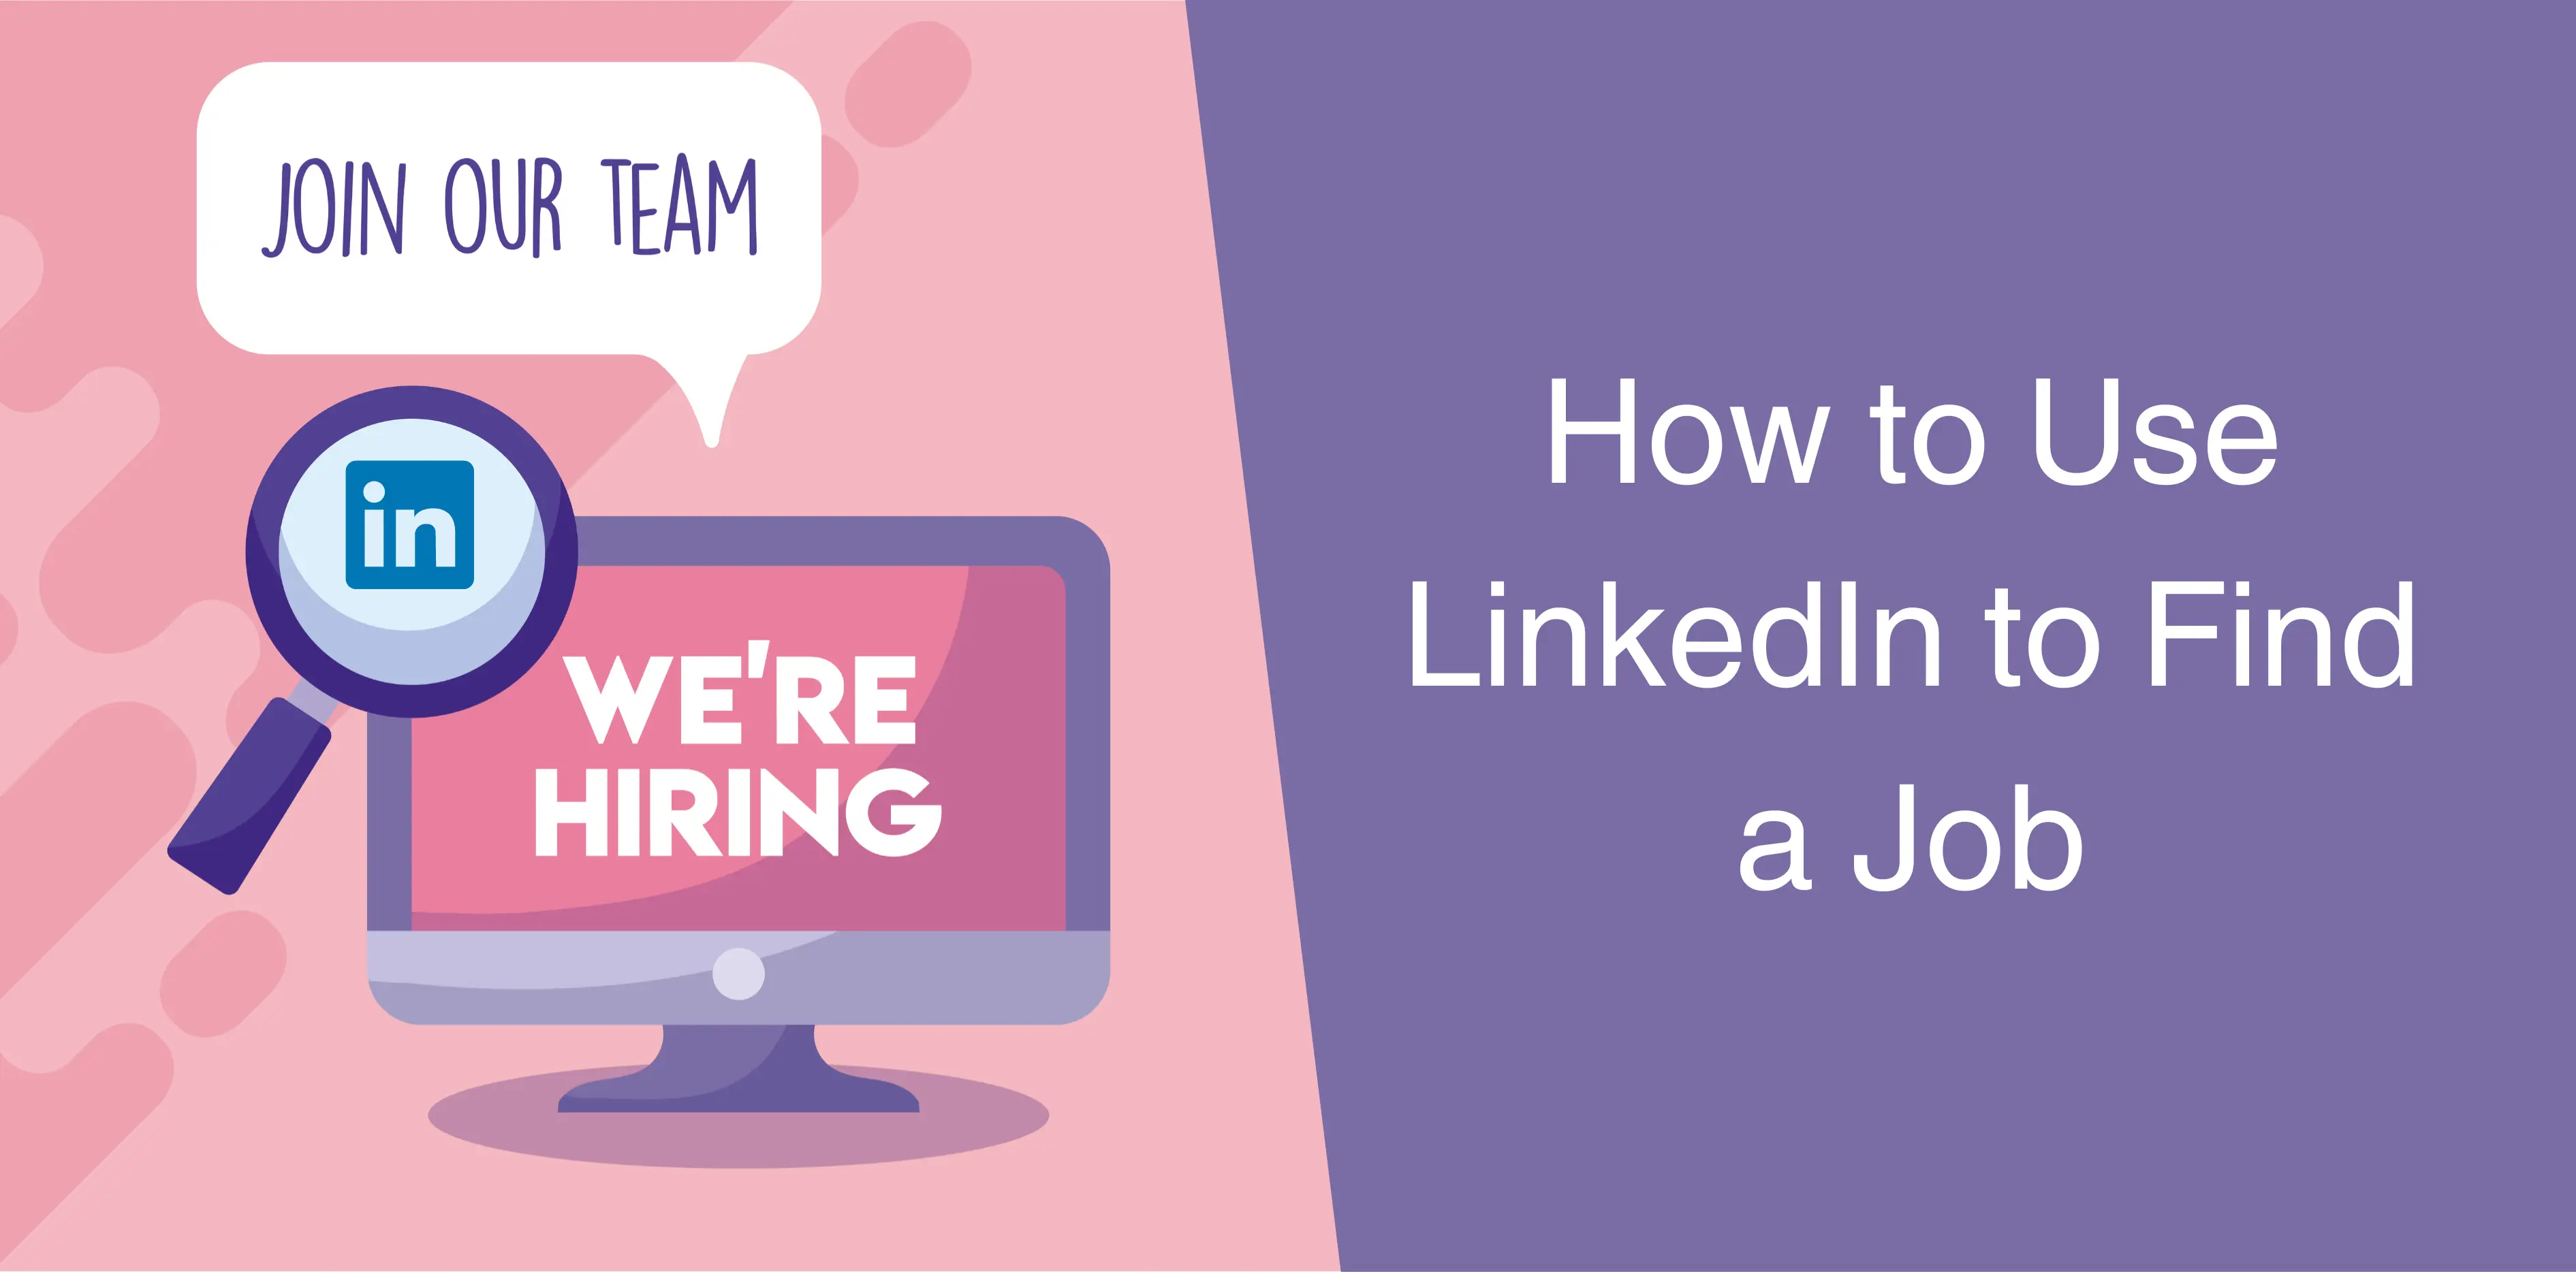 How to Use LinkedIn to Find a Job